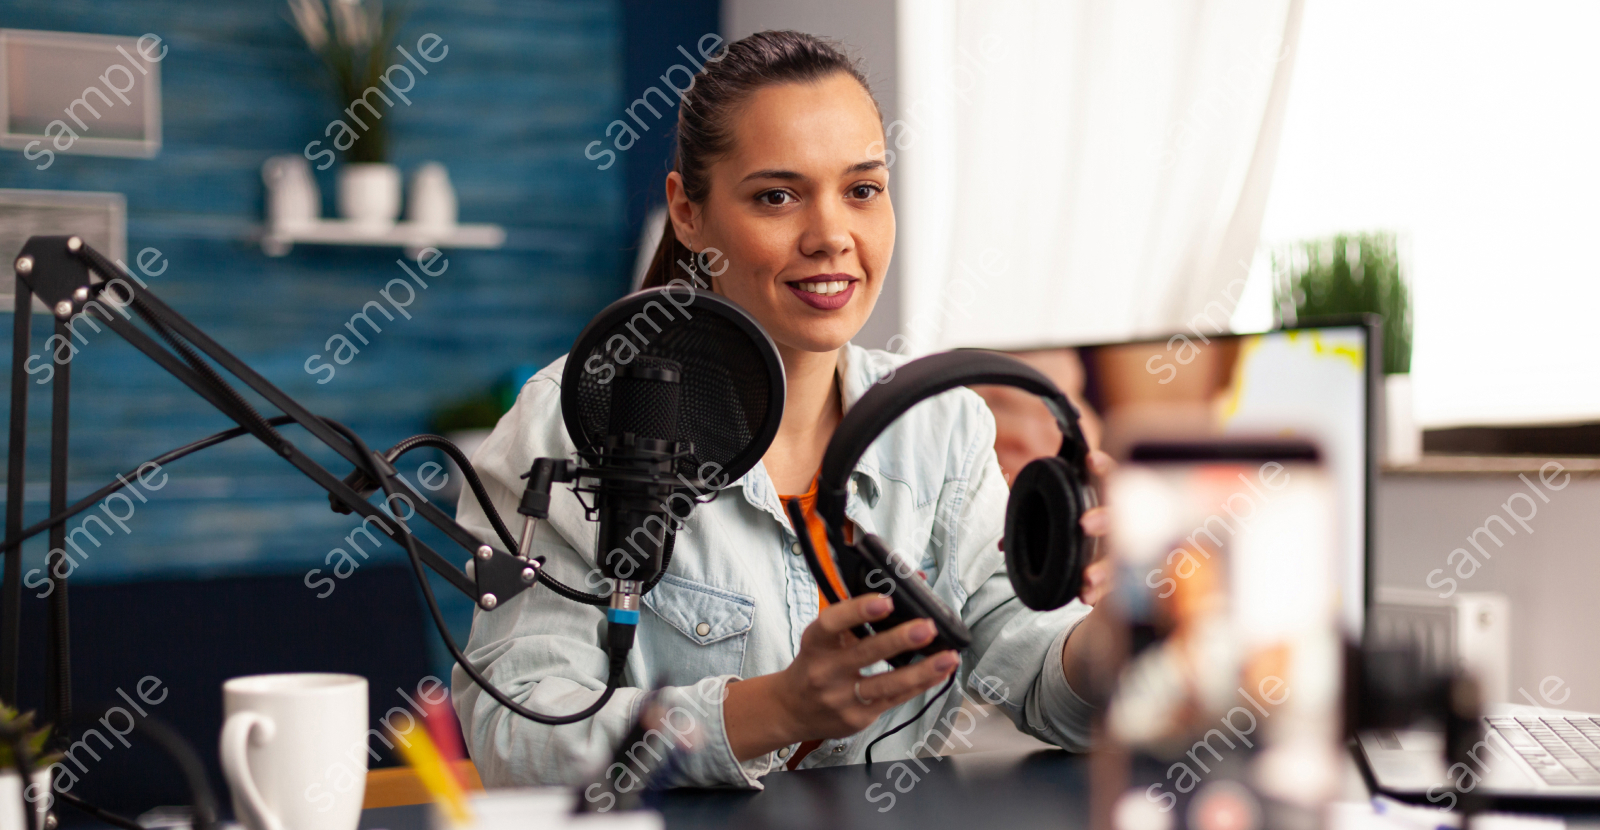 Why Podcasting is the Ultimate Marketing Tool for Your Business